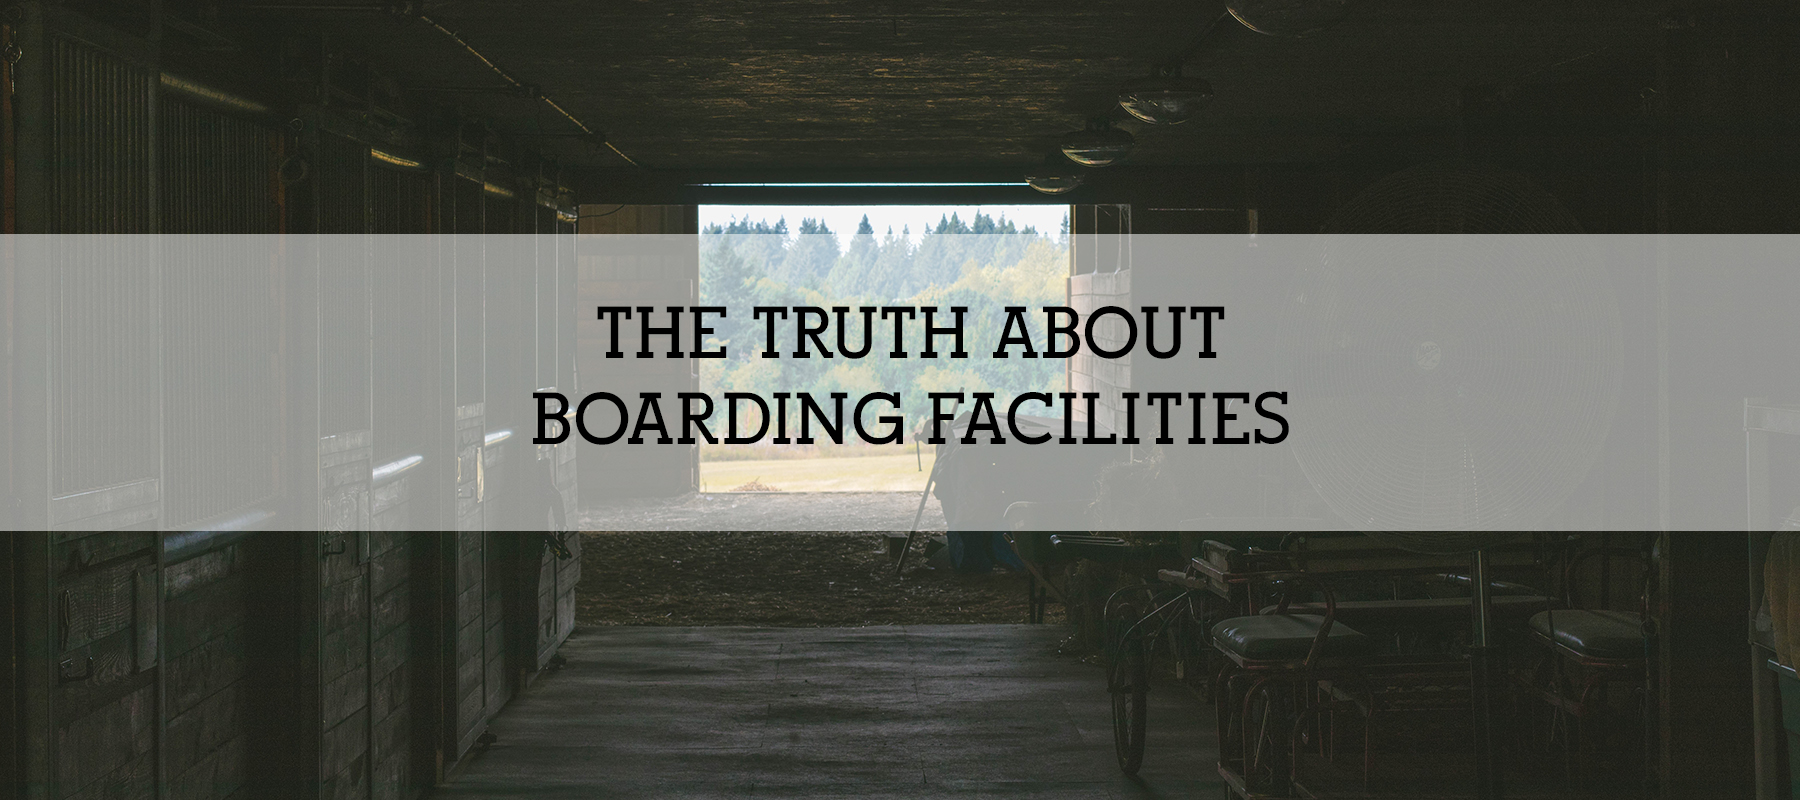 THE TRUTH ABOUT BOARDING FACILITIES